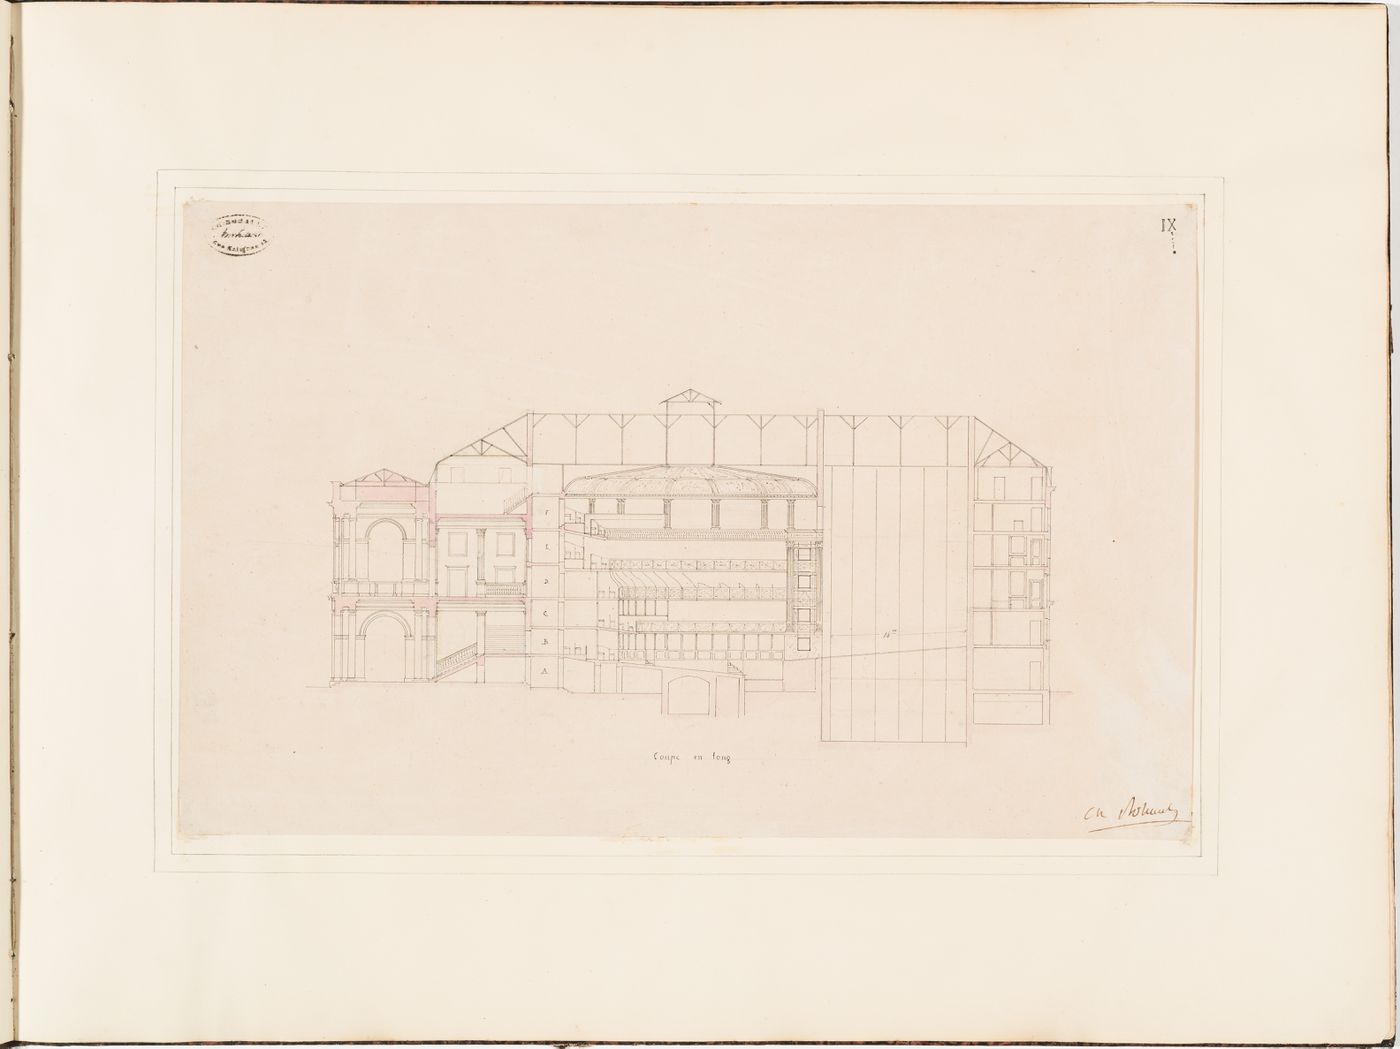 Longitudinal section for the Théâtre Royal Italien